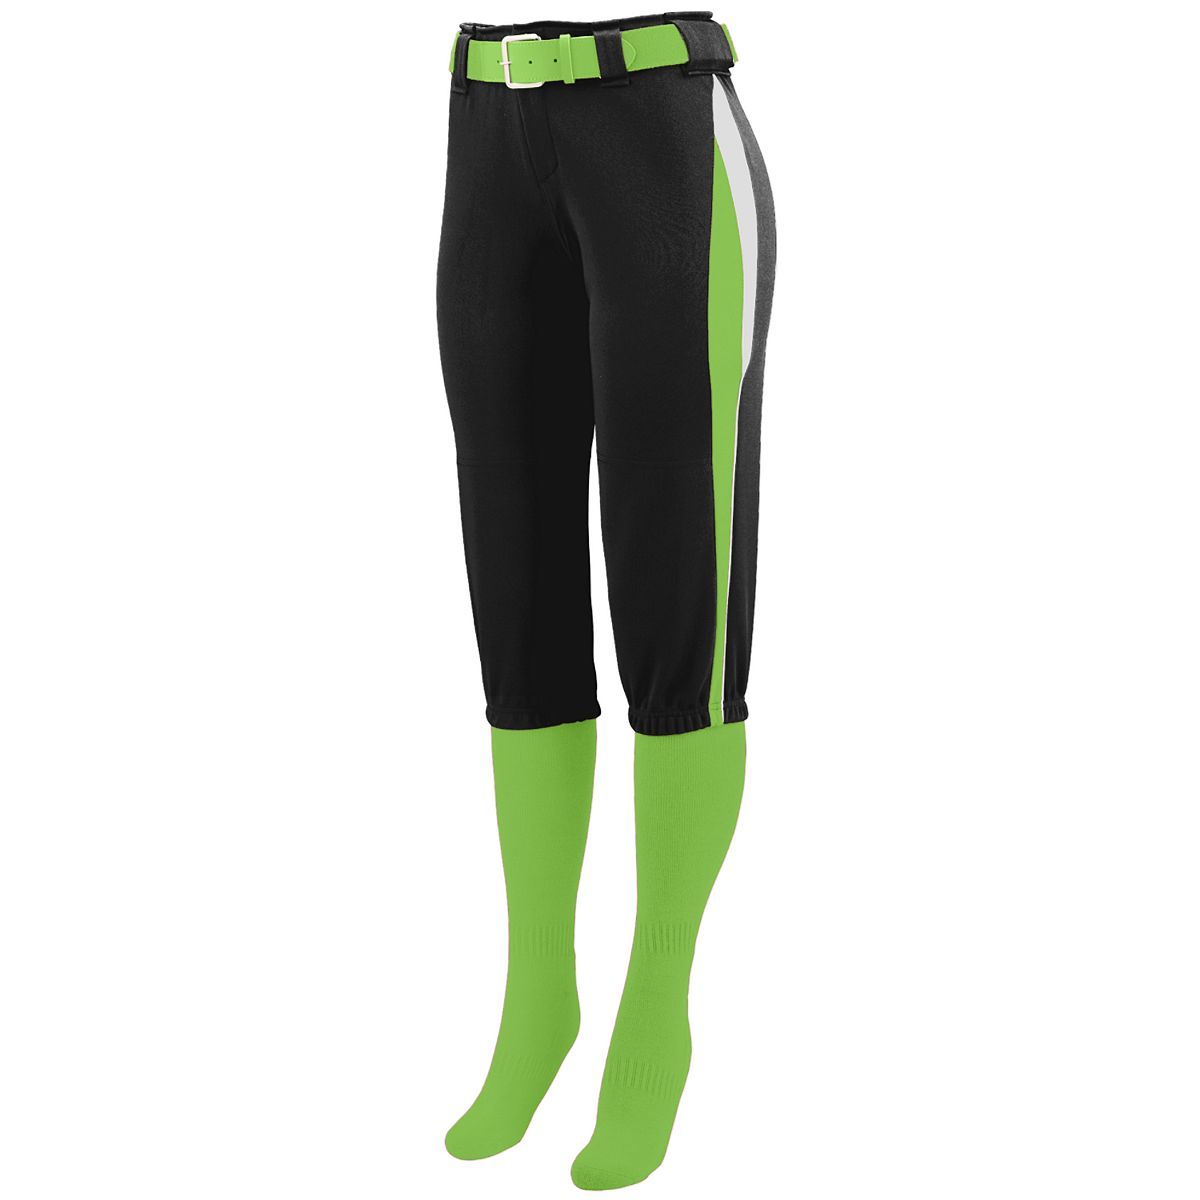 Augusta Sportswear Ladies Comet Pant in Black/Lime/White  -Part of the Ladies, Ladies-Pants, Pants, Augusta-Products, Softball product lines at KanaleyCreations.com